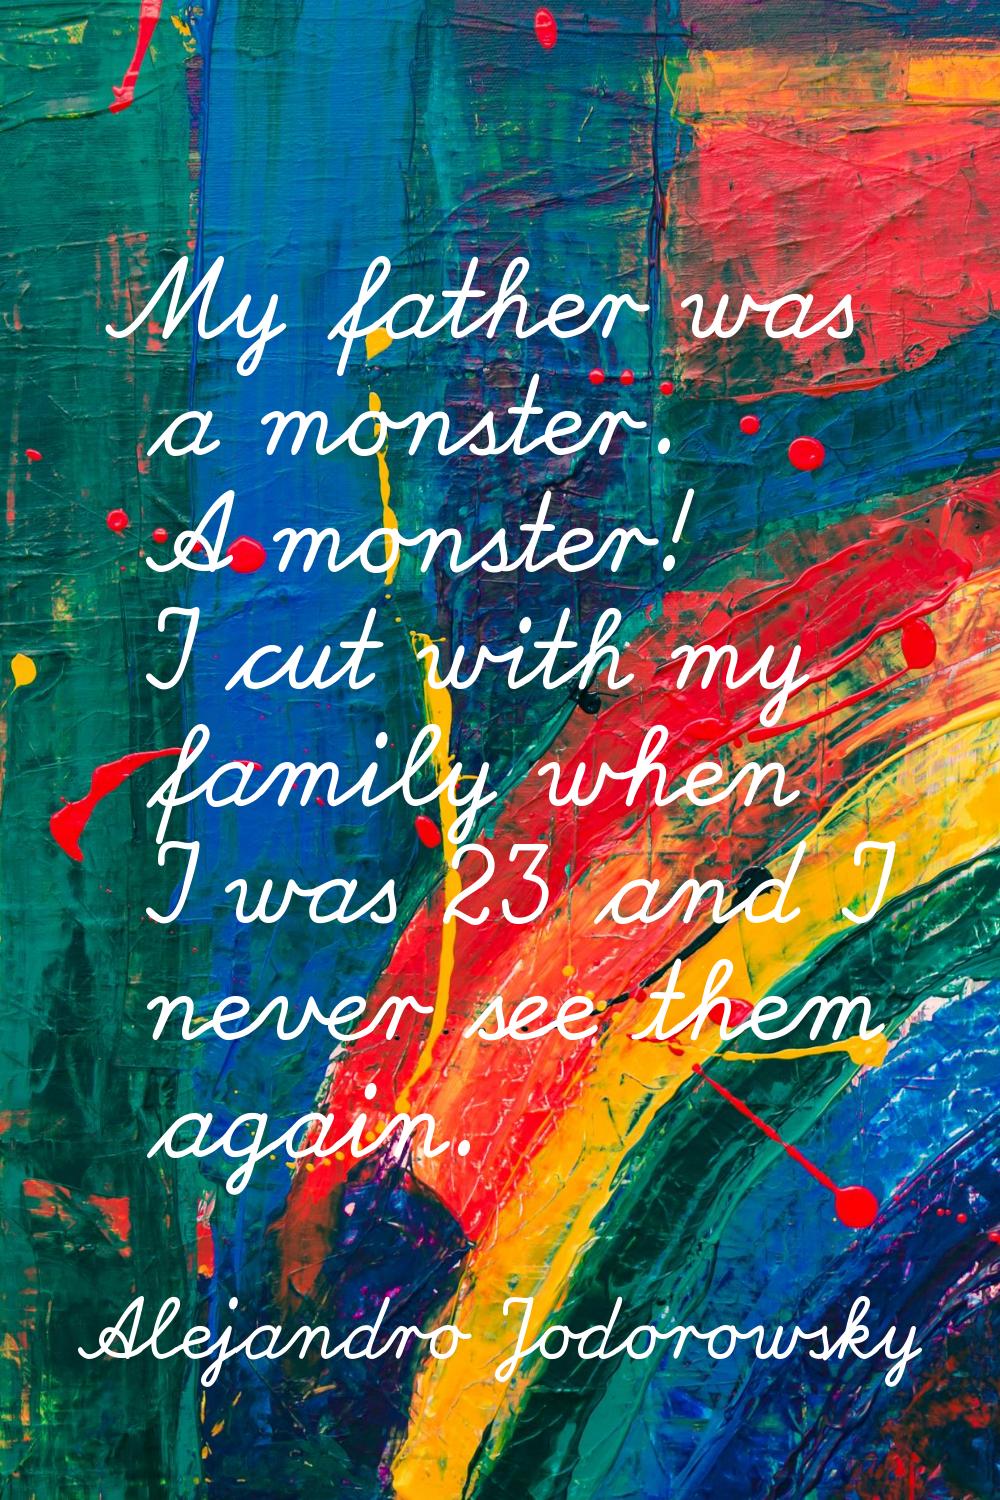 My father was a monster. A monster! I cut with my family when I was 23 and I never see them again.